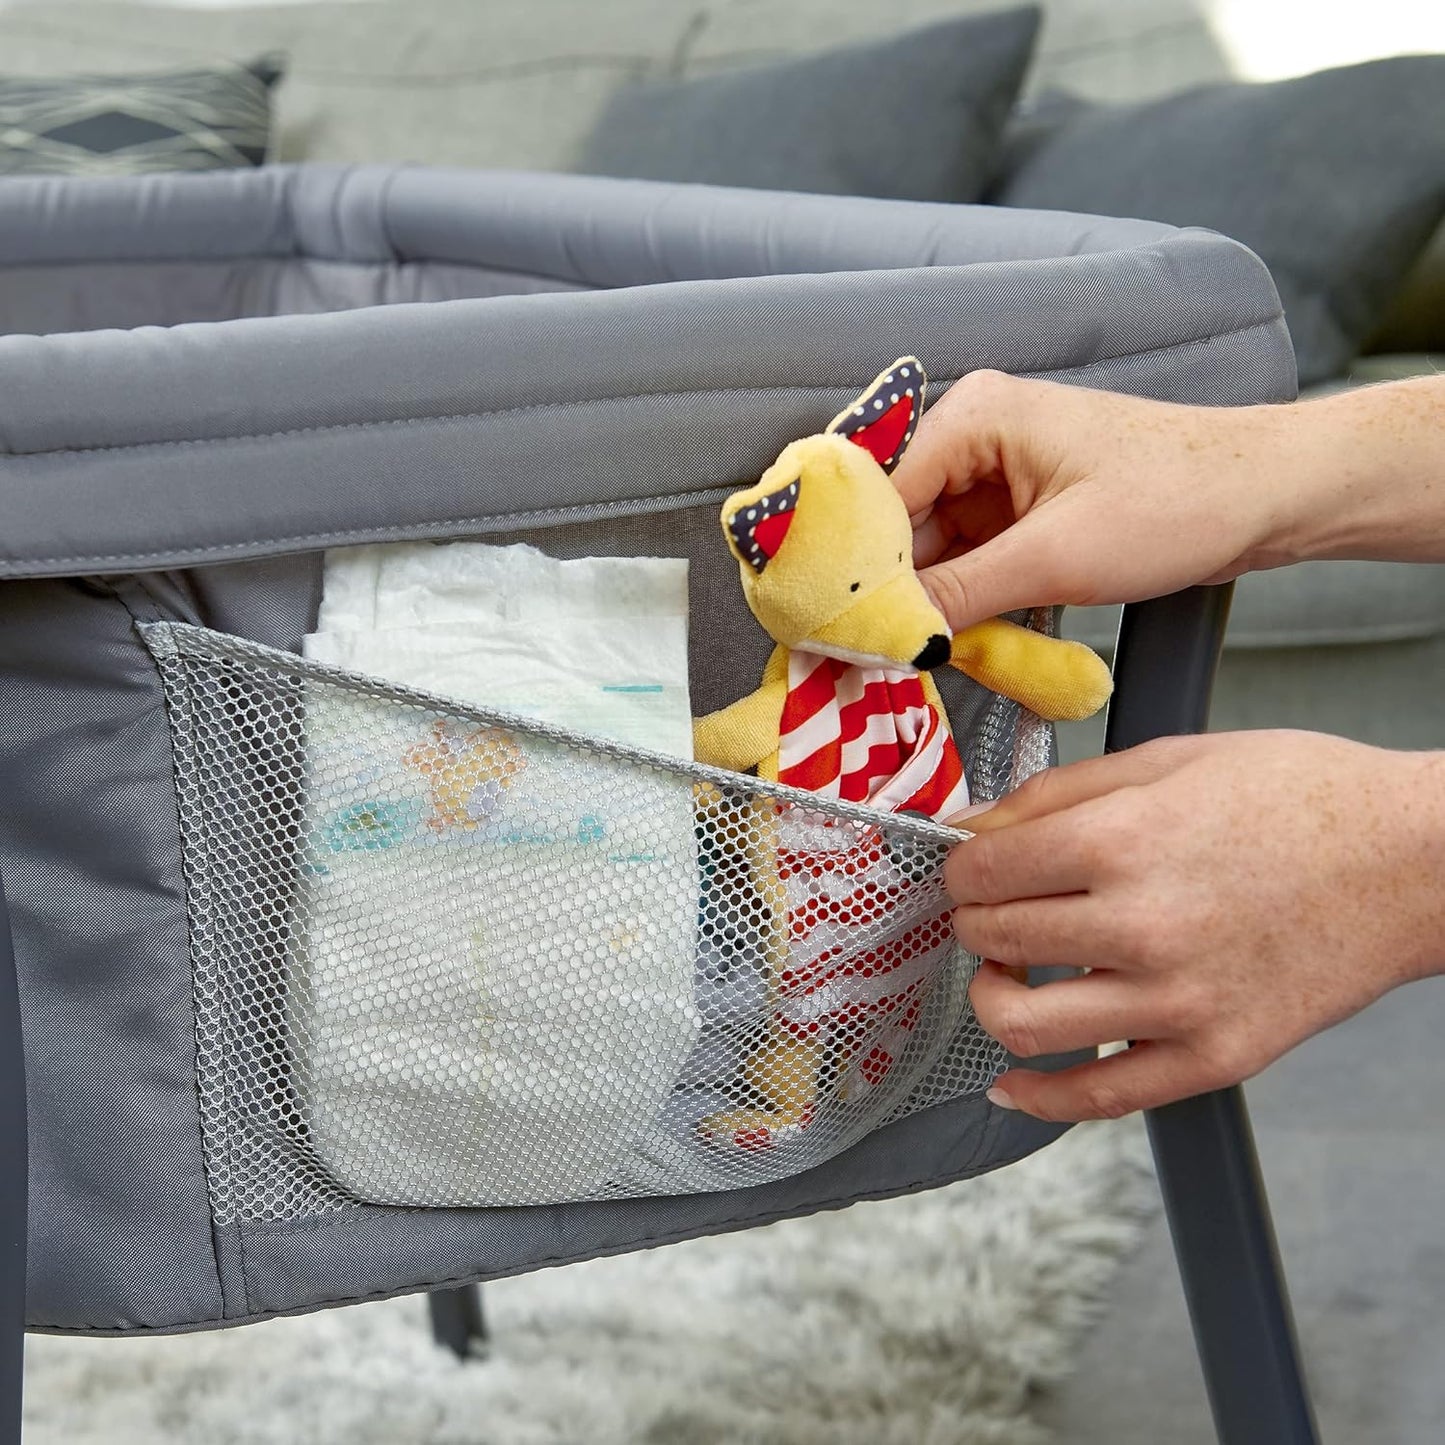 Lullago® Anywhere Portable Bassinet, Lightweight, Space-Saving Baby Bassinet with Waterproof Mattress and Fitted Sheet, Travel Bassinet for Baby Includes Carry Bag | Sandstone/Grey - Design By Technique